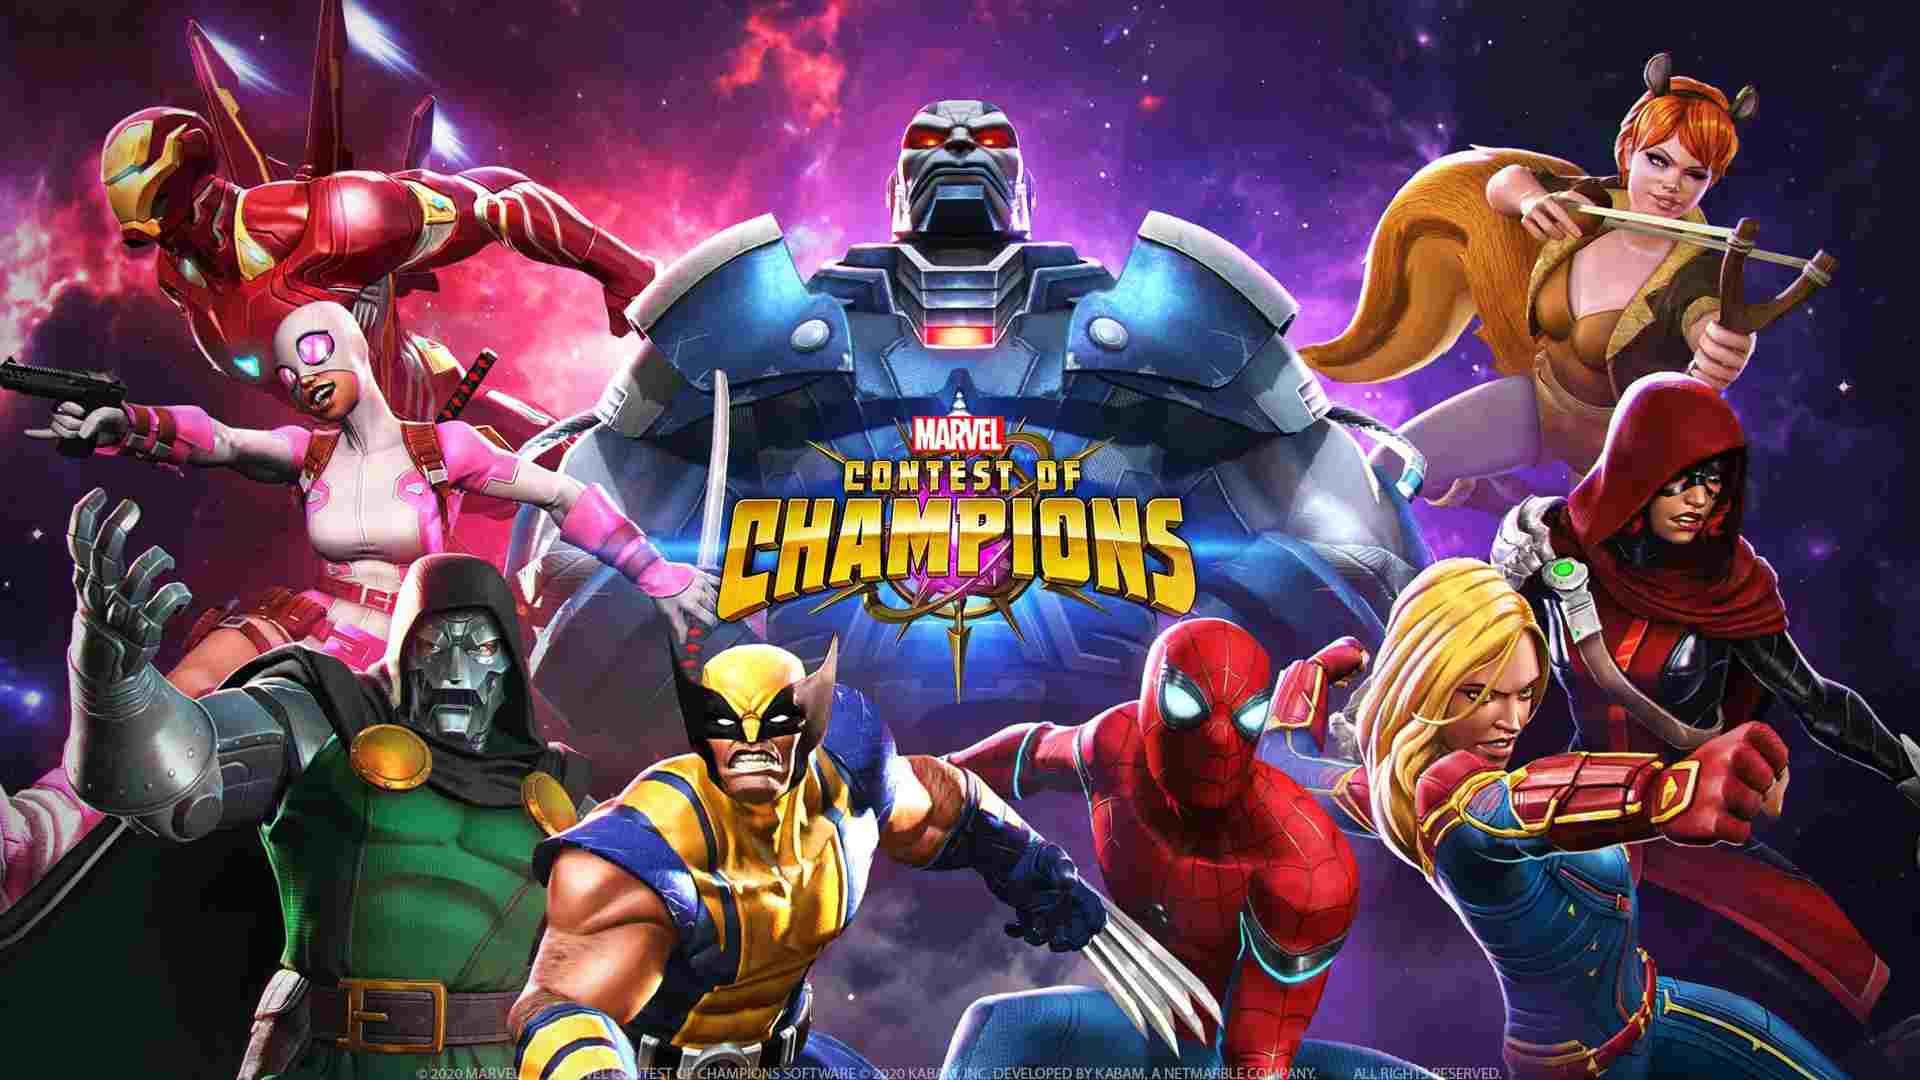 Marvel Contest of Champions 44.1.0 APK MOD Menu LMH, Huge Amount Of Money, crystals, all characters unlocked, dmg